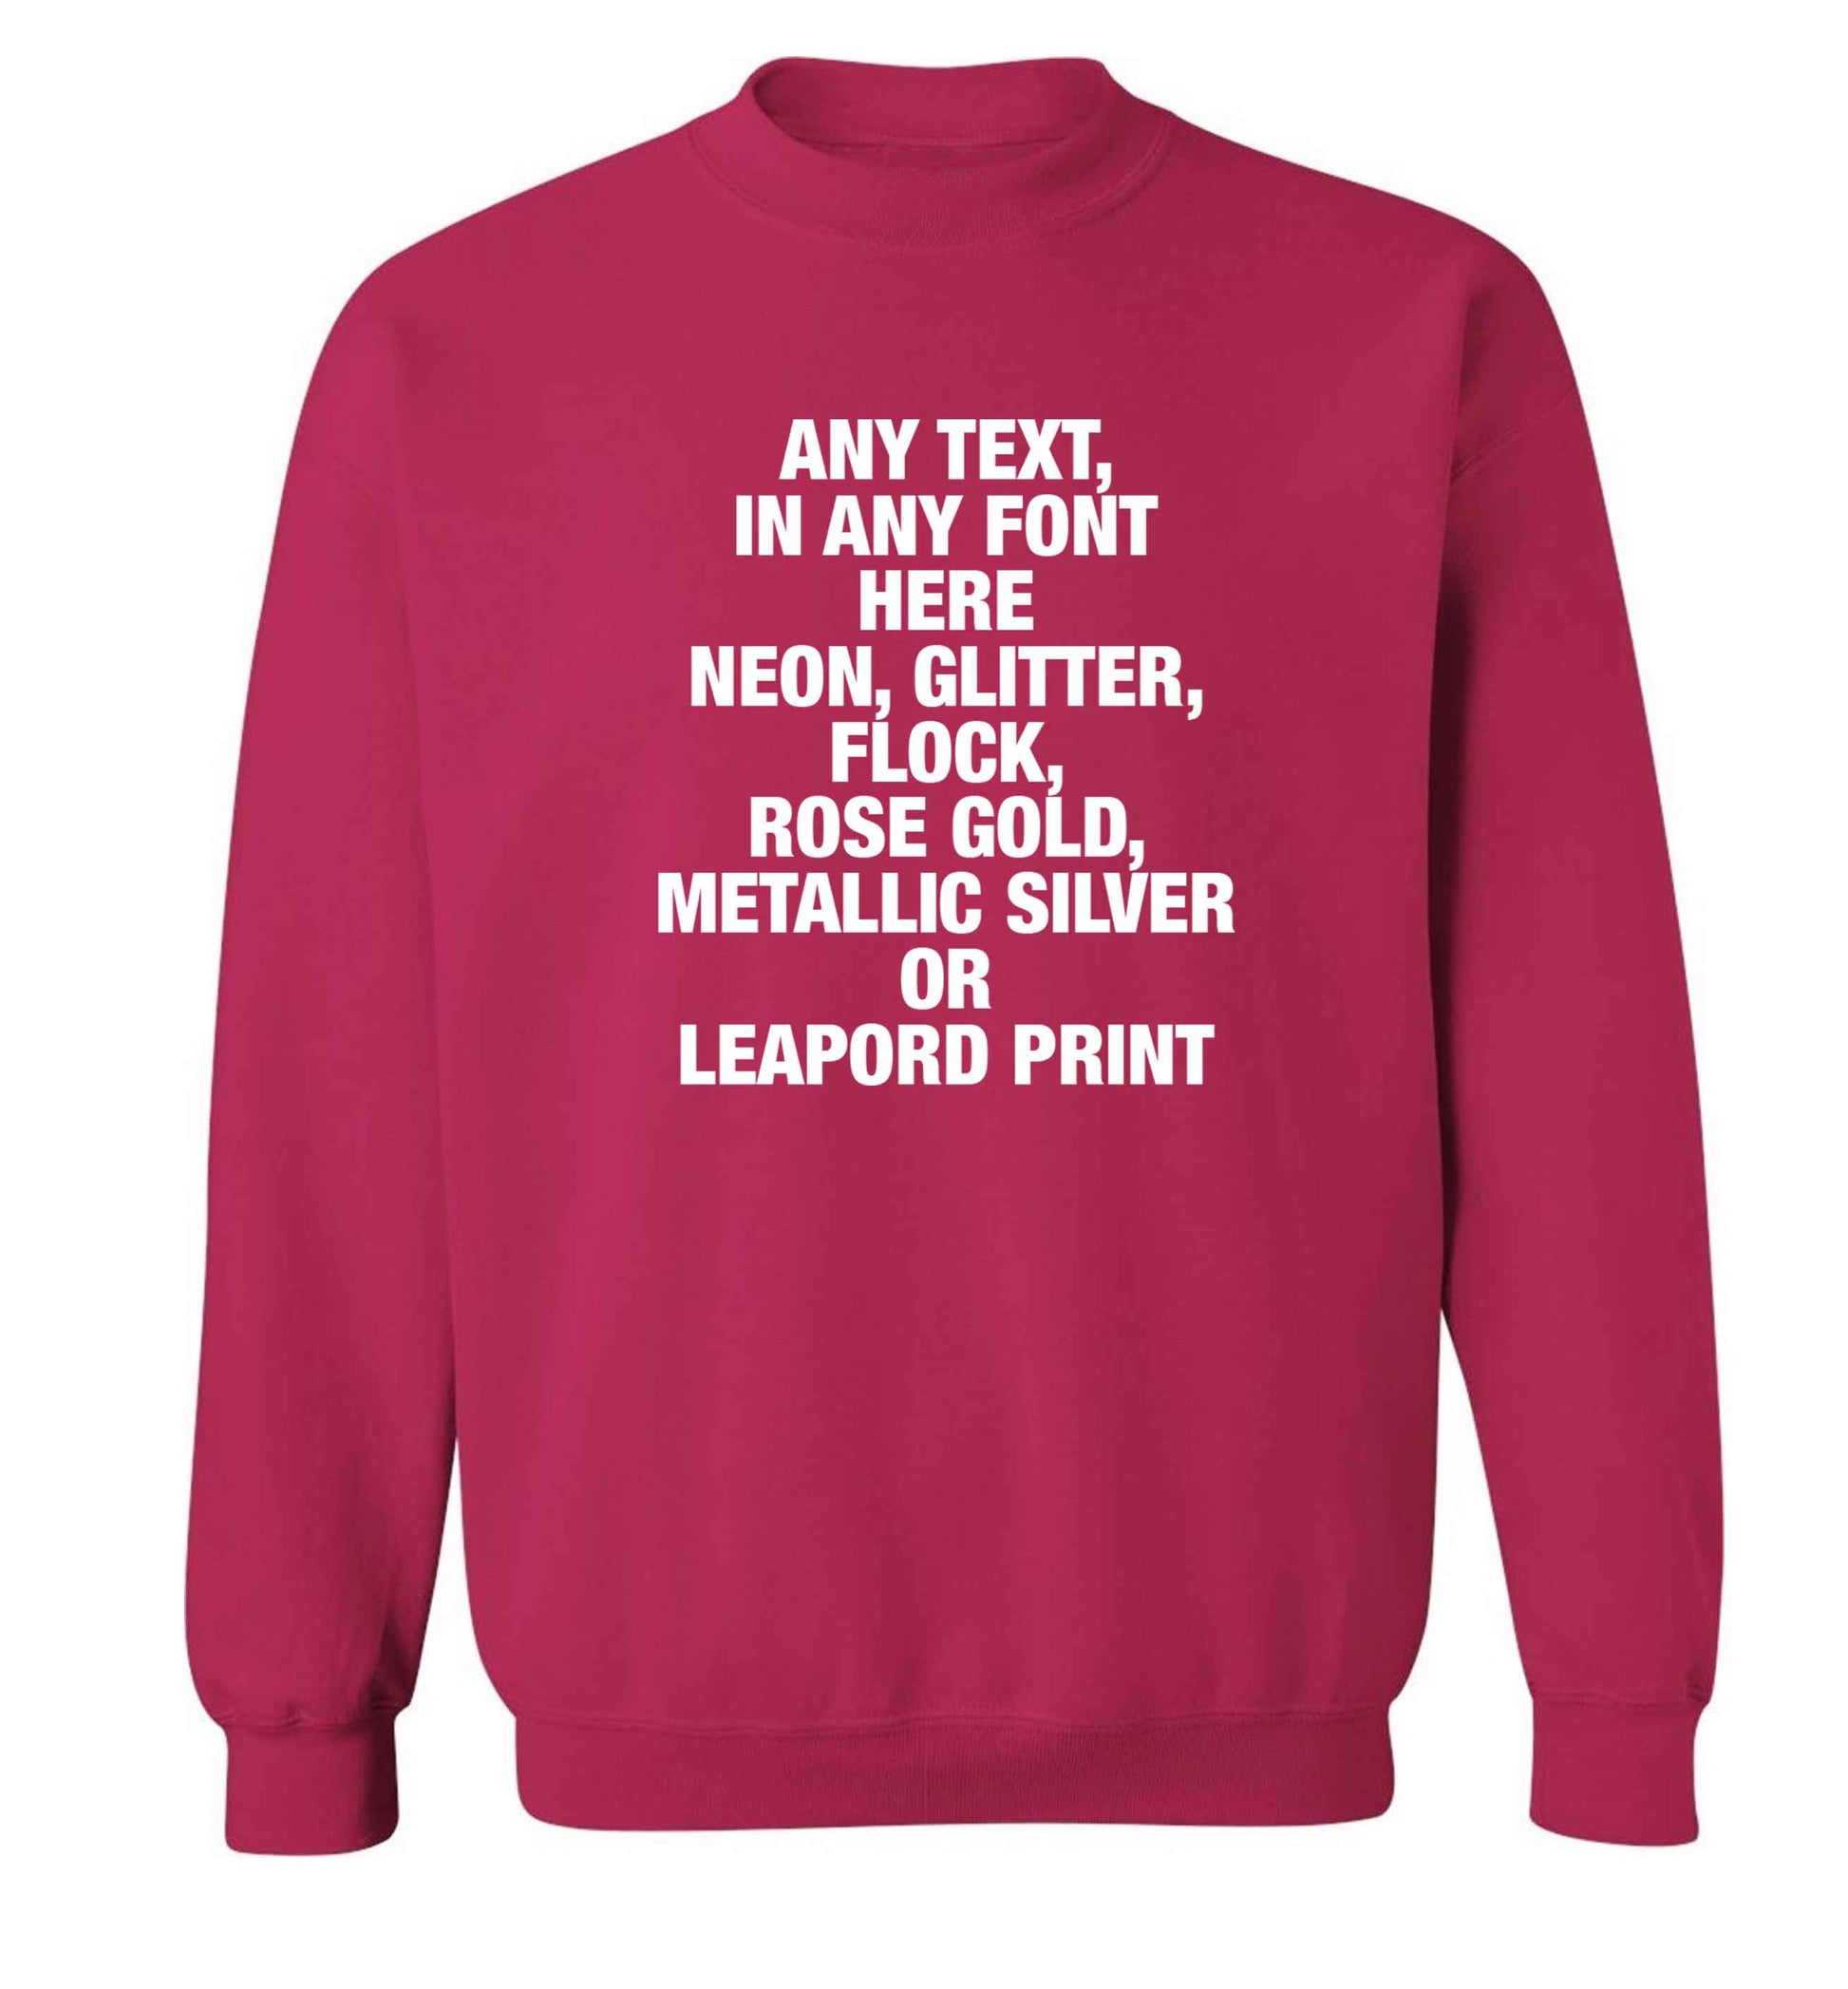 Premium custom order any text colour and font adult's unisex pink sweater 2XL